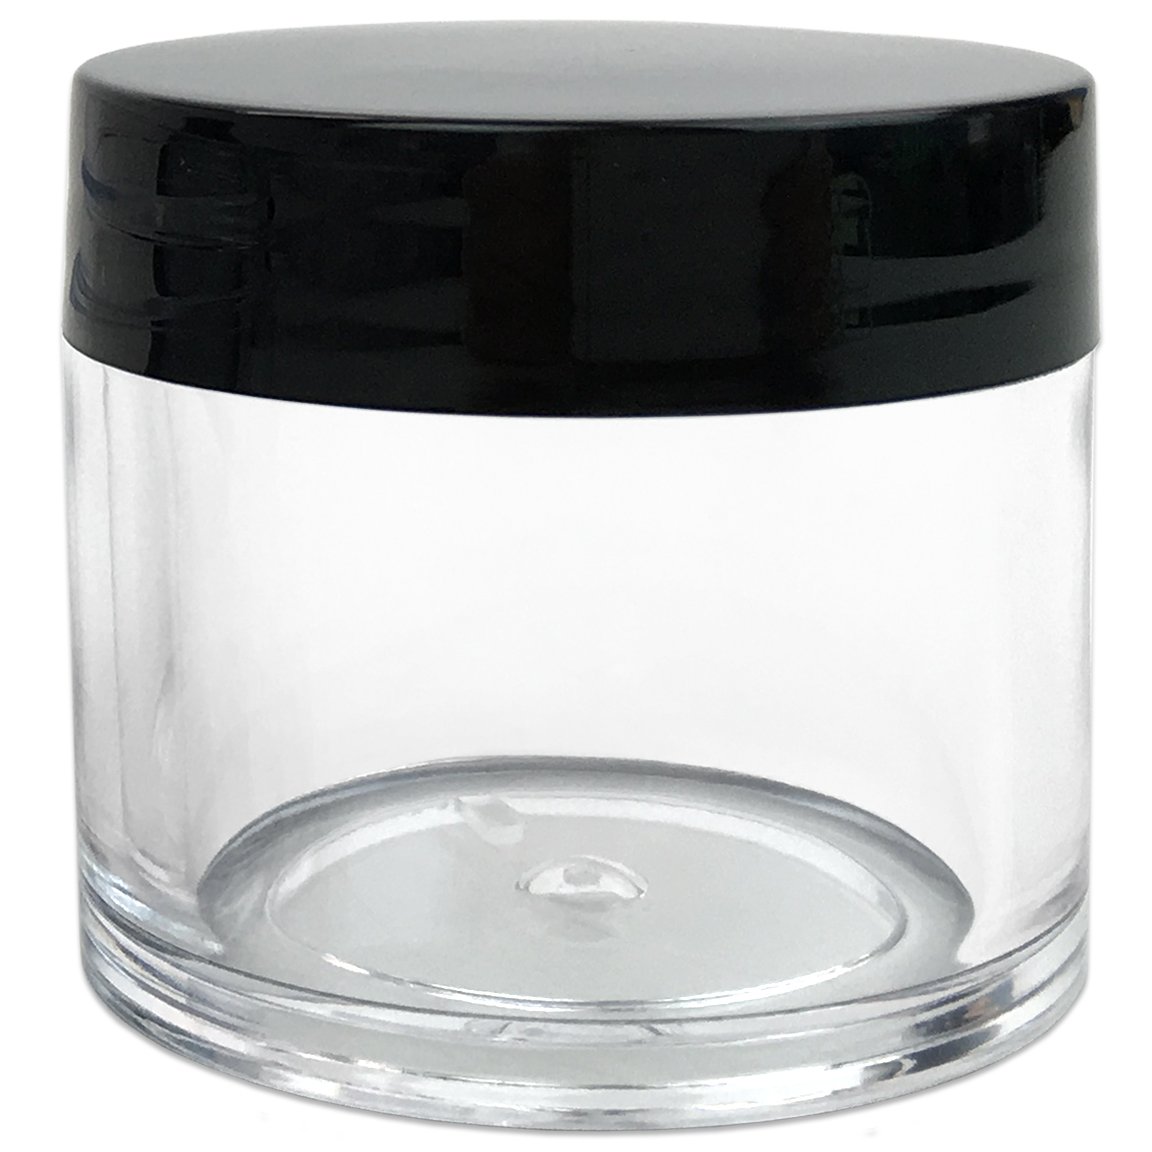 Beauticom 30g/30ml (1 fl. oz.) Double Wall Clear Plastic Leak Proof Jars with Flat Top Lids for Creams, Lotions, Make Up, Powders, Glitters, and more... (Color: Black Lid, Pieces: 12)